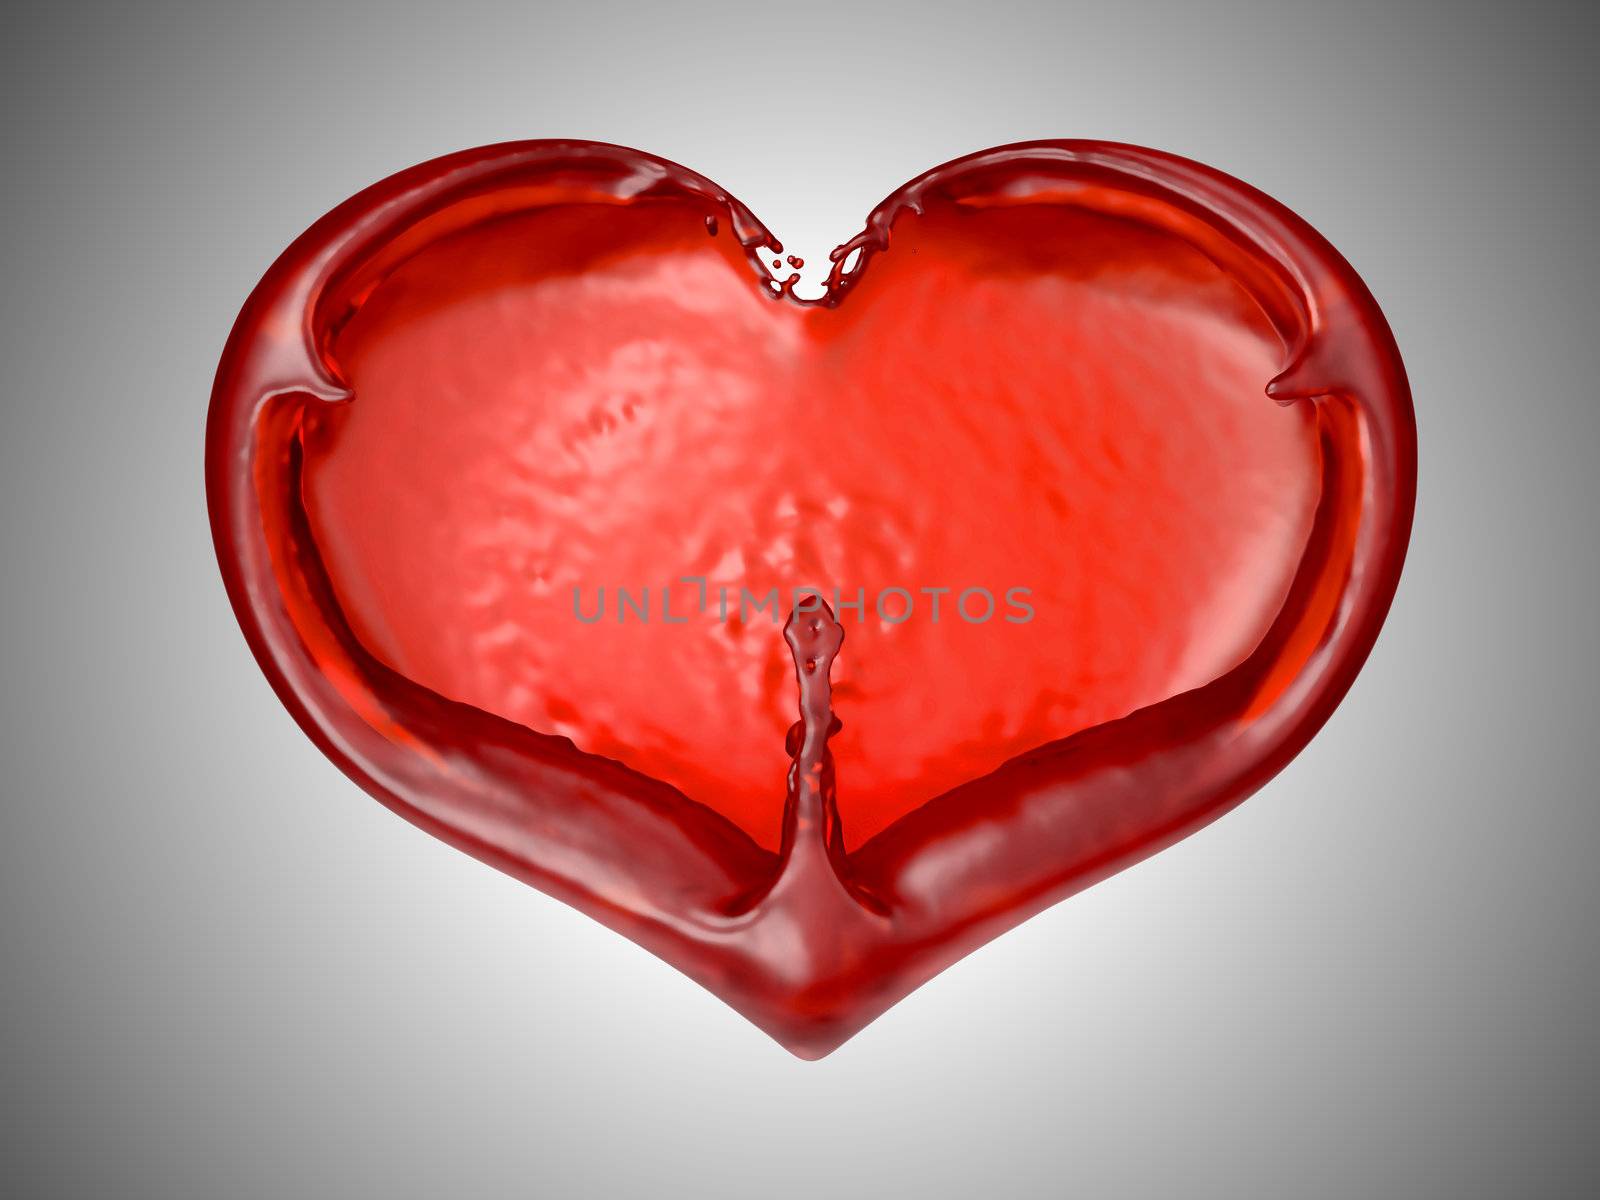 Love and Romance - Red fluid heart shape. Over grey background